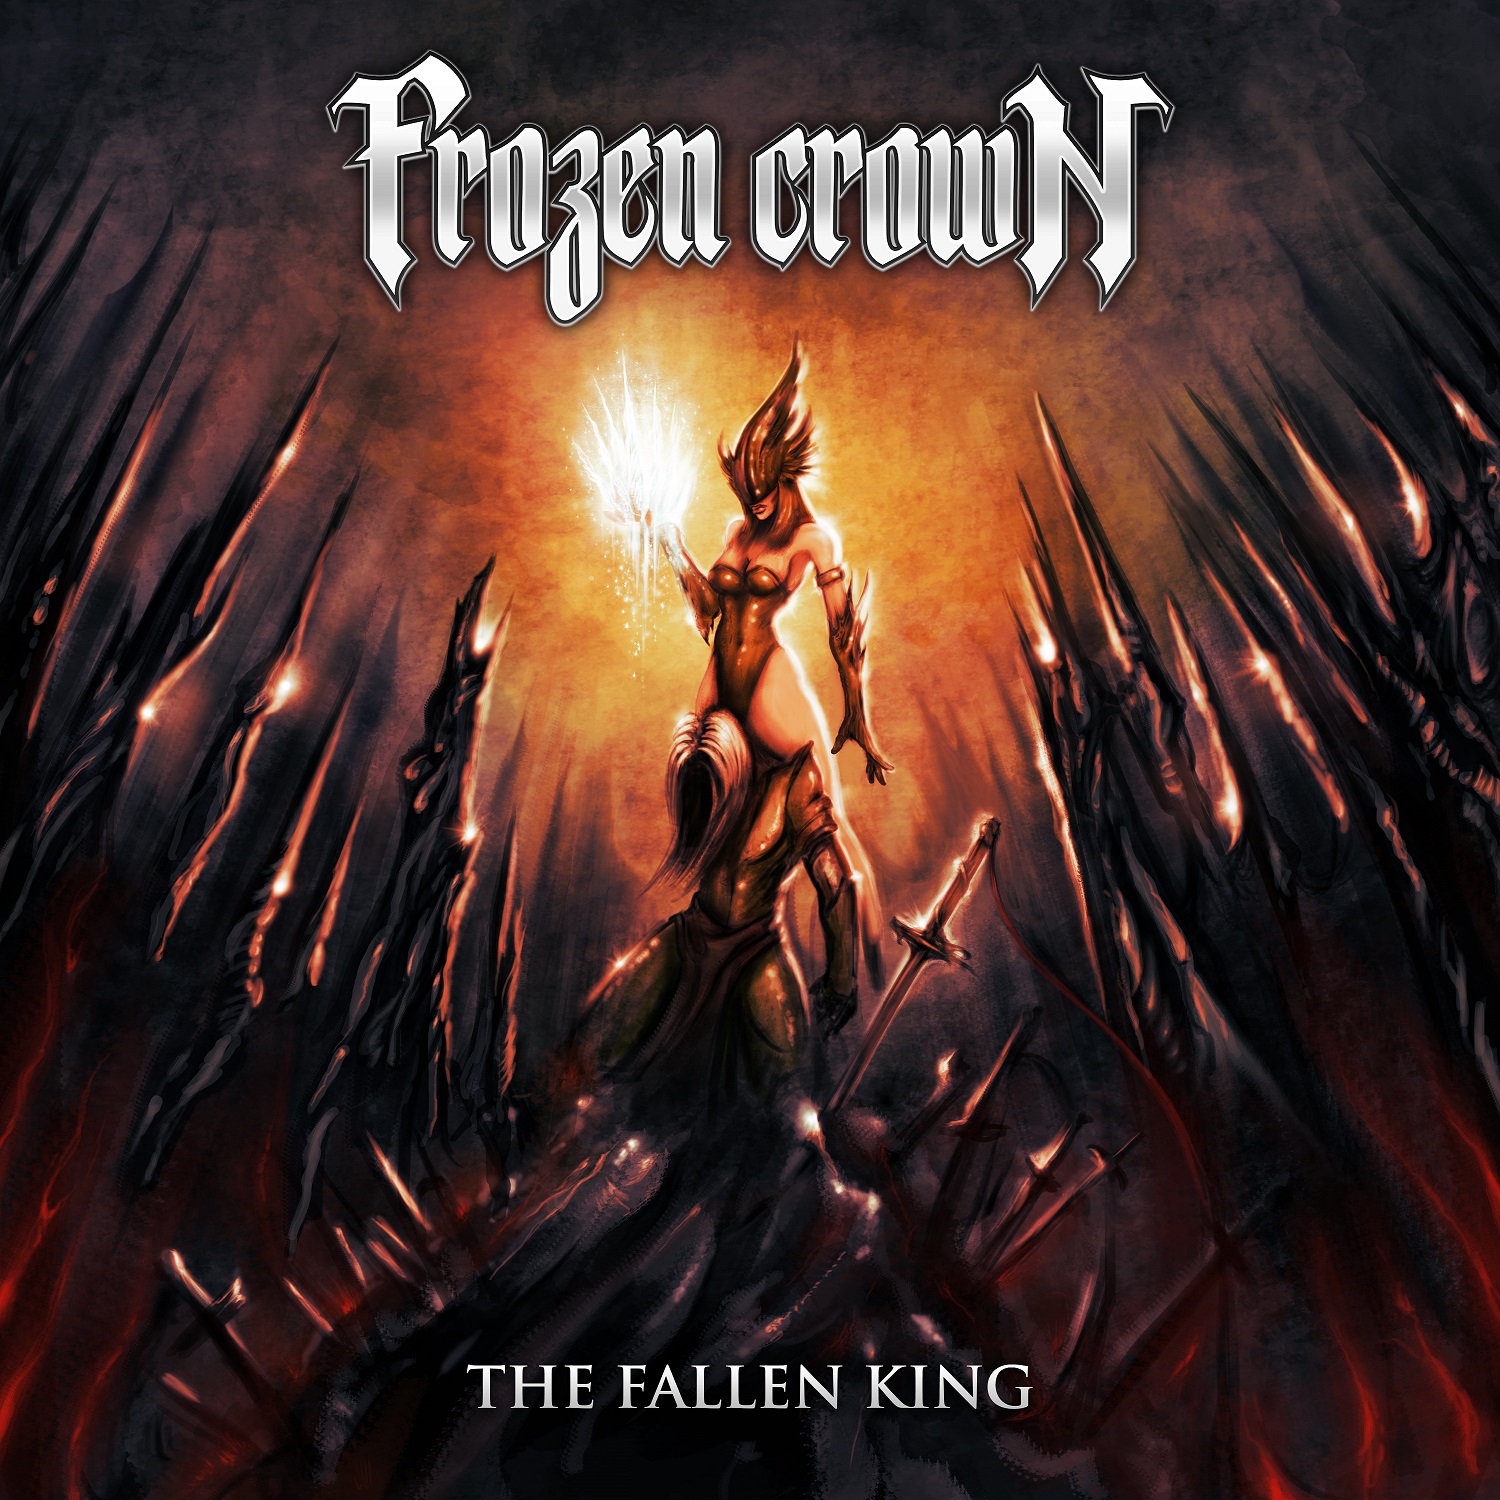 Frozen Crown - The Fallen King Review | Angry Metal Guy